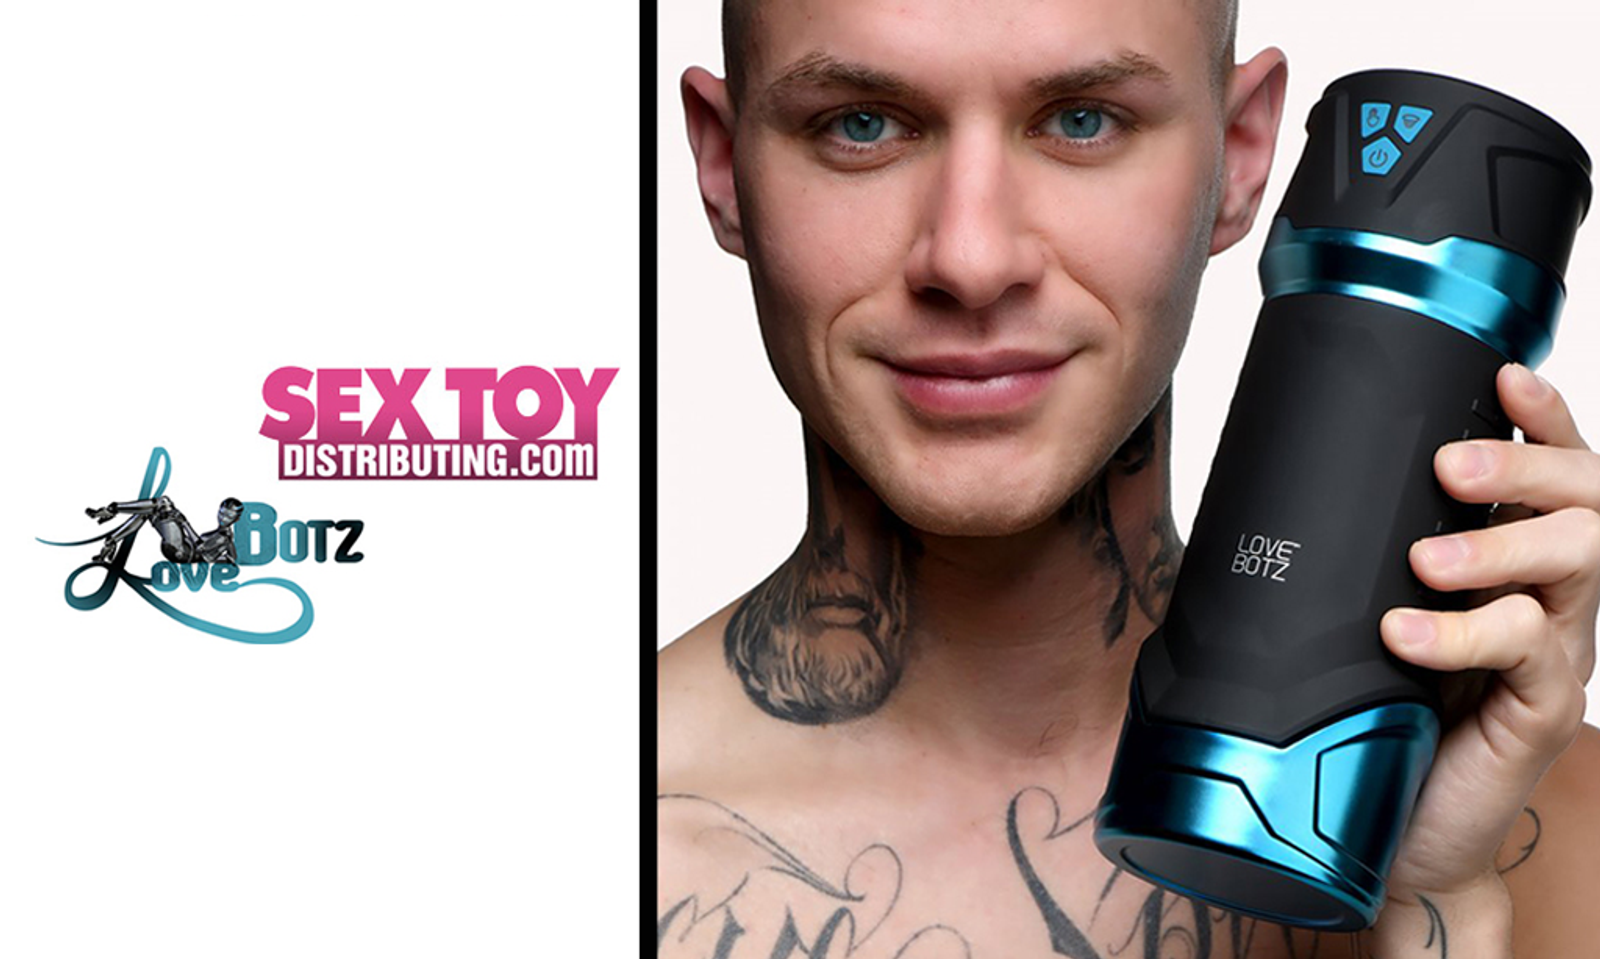 SexToyDistributing Touts Success of LoveBotz Automated Strokers